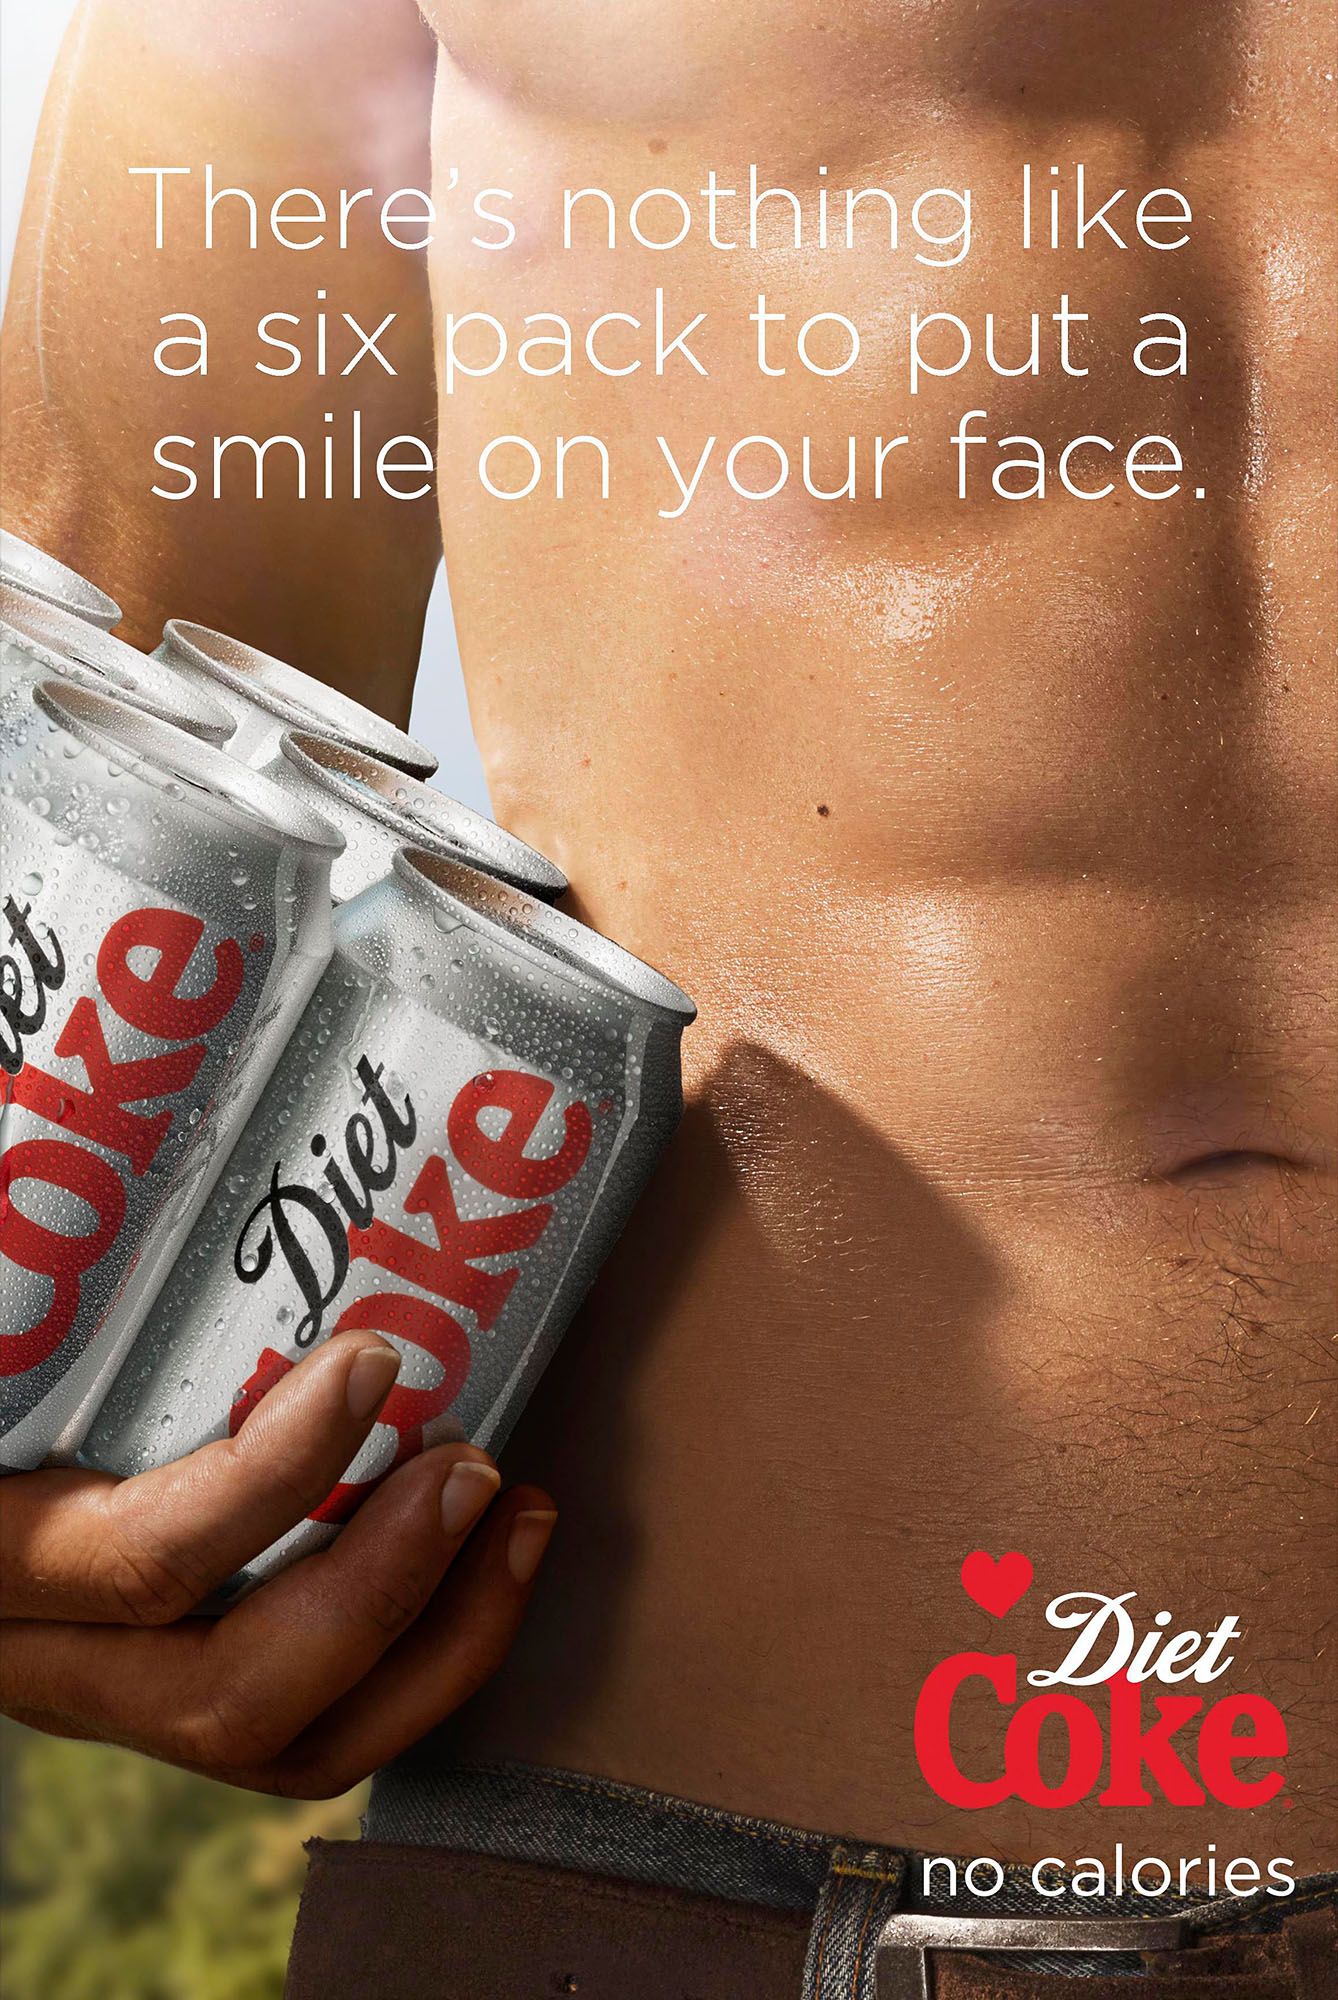 Jonathan Knowles Advertising Photography - Diet Coke Coca Cola ...